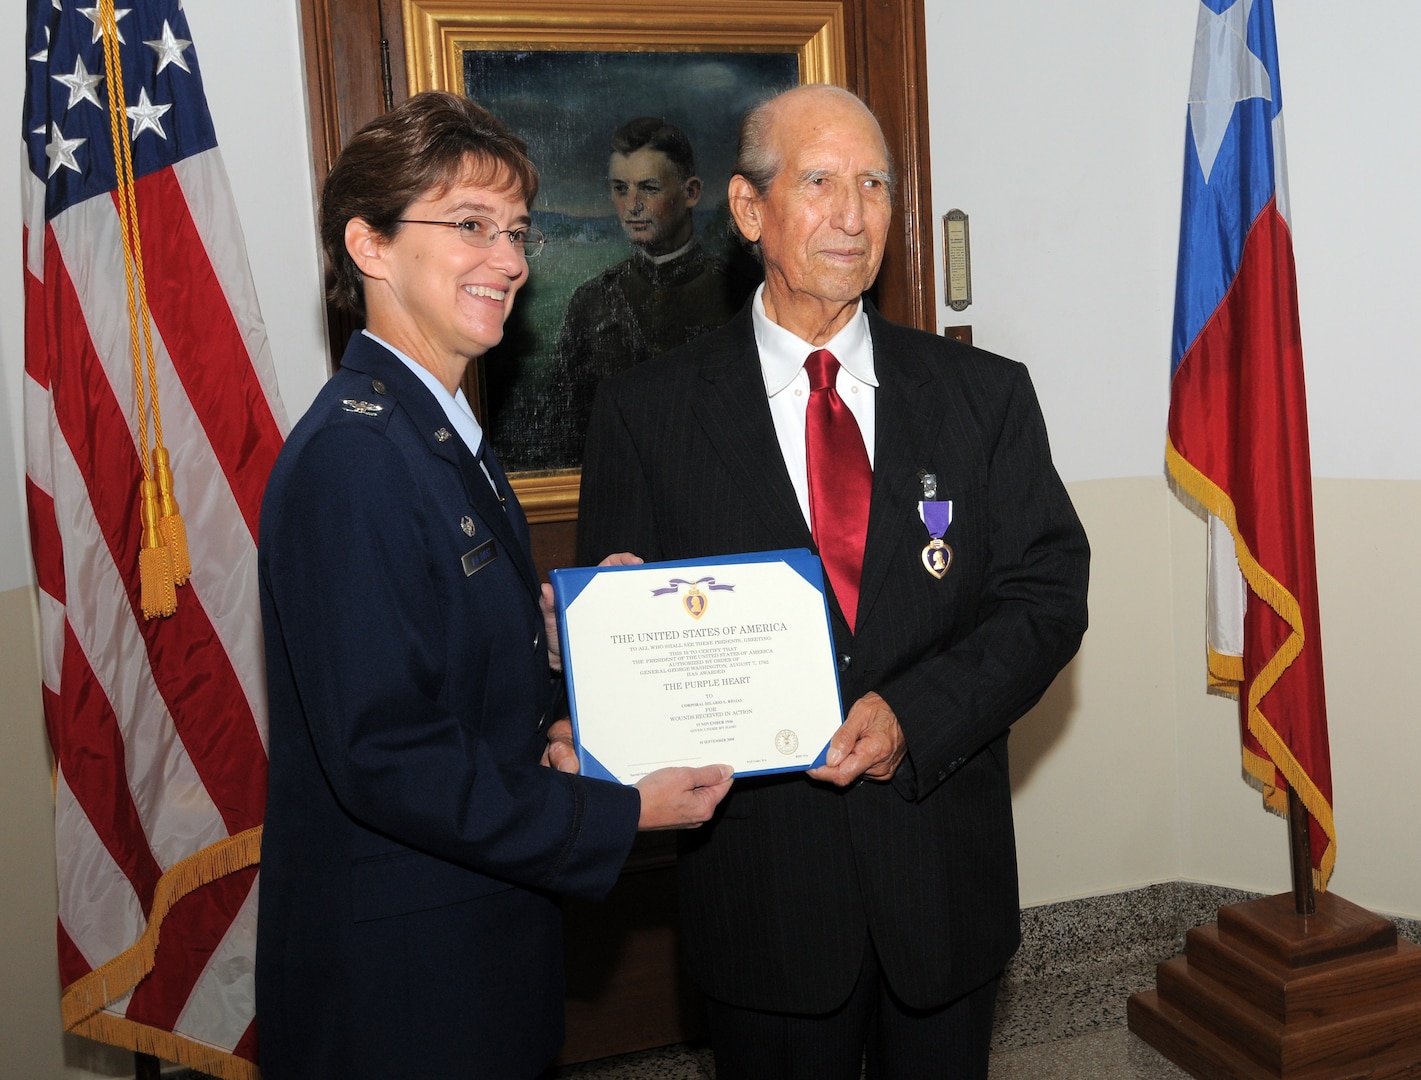 Col. Jacqueline Van Ovost, 12th Flying Training Wing command, presents the Purple Heart to World War II veteran Hilario Riojas, a former Army Air Forces corporal, who was wounded by artillery shell shrapnel during a battle in Germany more than 60 years ago. (U.S. Air Force photo by Melissa Peterson)